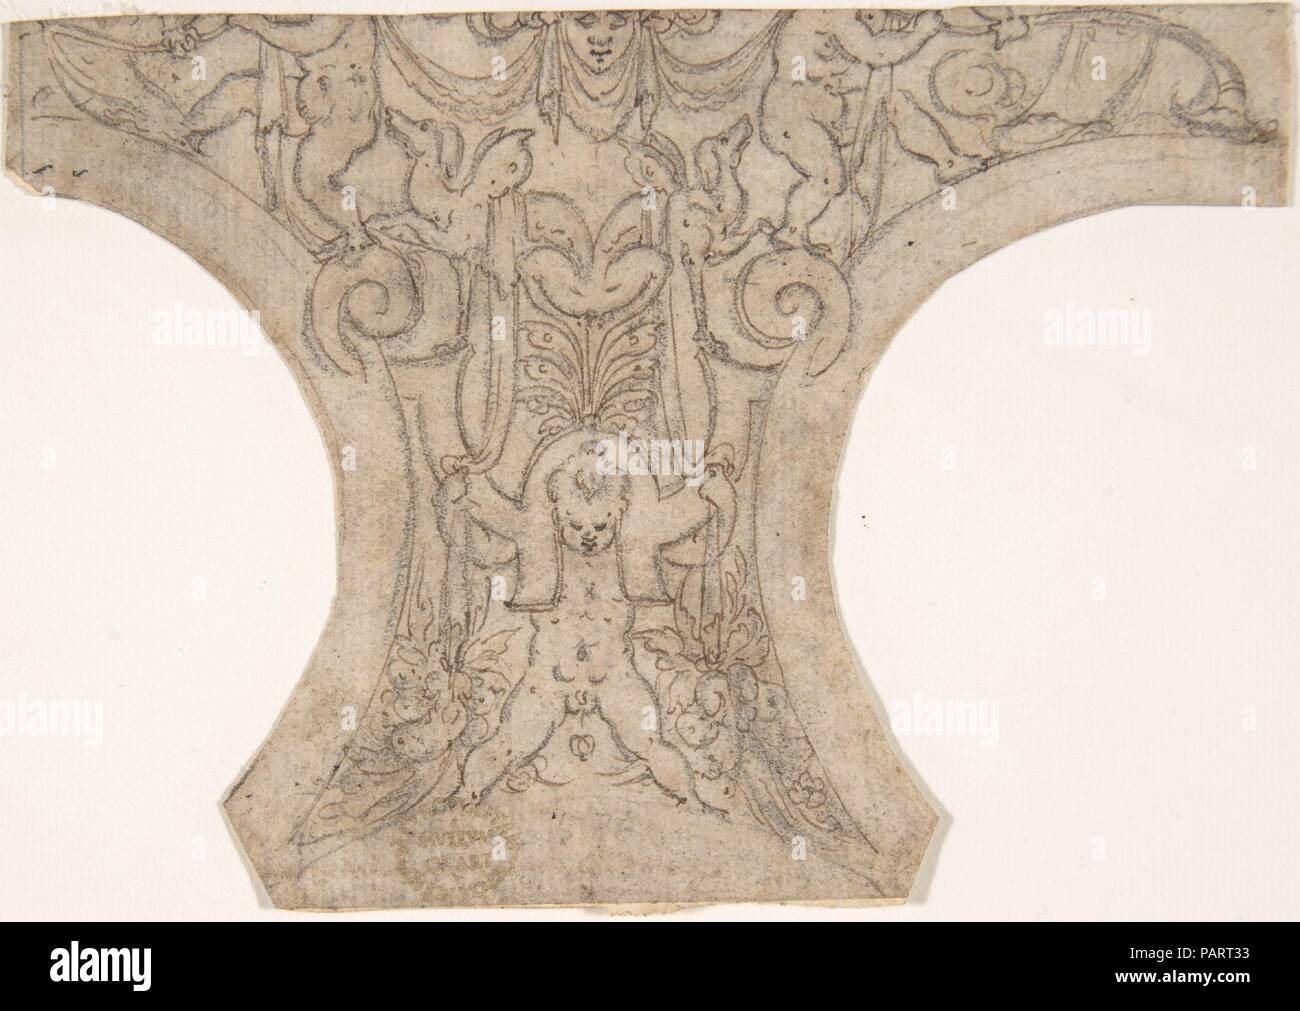 Decoration for a Spandrel in a Cove. Artist: Anonymous, Italian, 16th century (Italian, active Central Italy, ca. 1550-1580). Dimensions: 3-1/4 x 4-1/2 in.  (8.3 x 11.4 cm). Date: 16th century. Museum: Metropolitan Museum of Art, New York, USA. Stock Photo